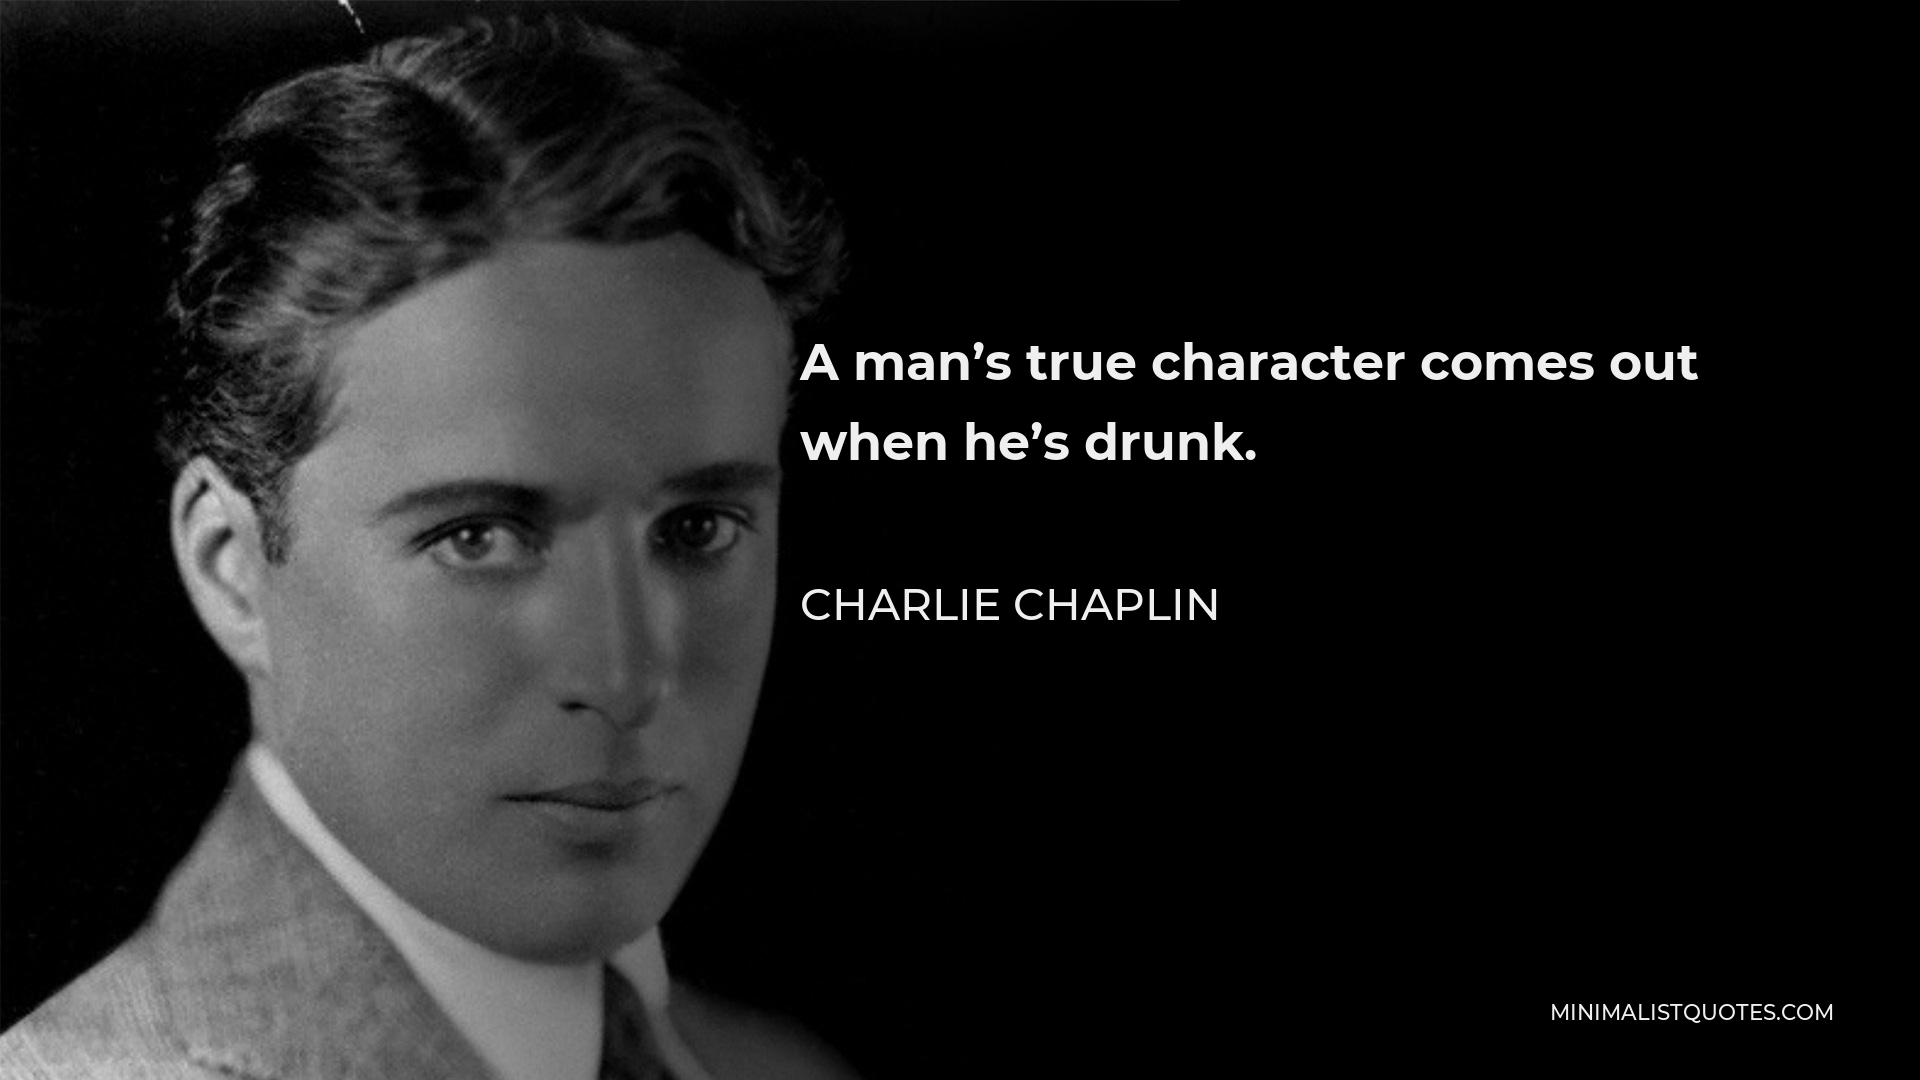 Charlie Chaplin Quote - A man’s true character comes out when he’s drunk.